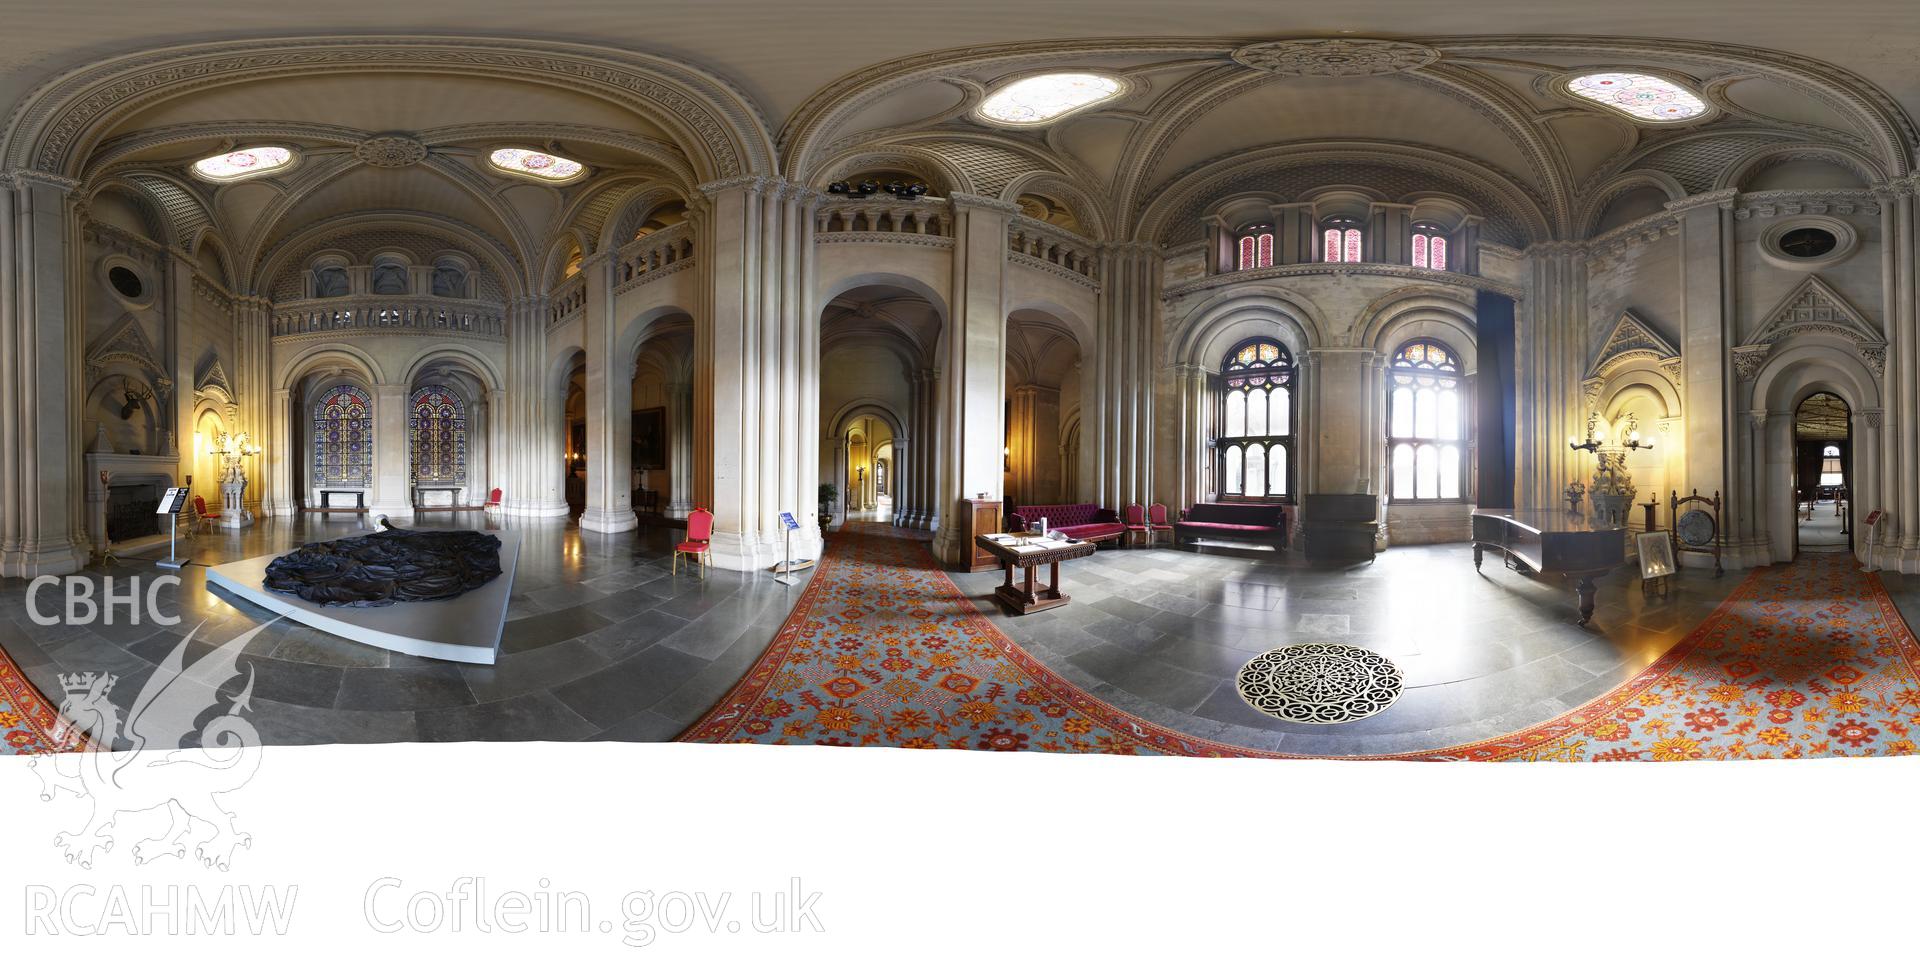 Reduced resolution Tiff of stitched images in the Hall at Penrhyn Castle produced by Susan Fielding and Rita Singer, October 2017. Produced through European Travellers to Wales project.